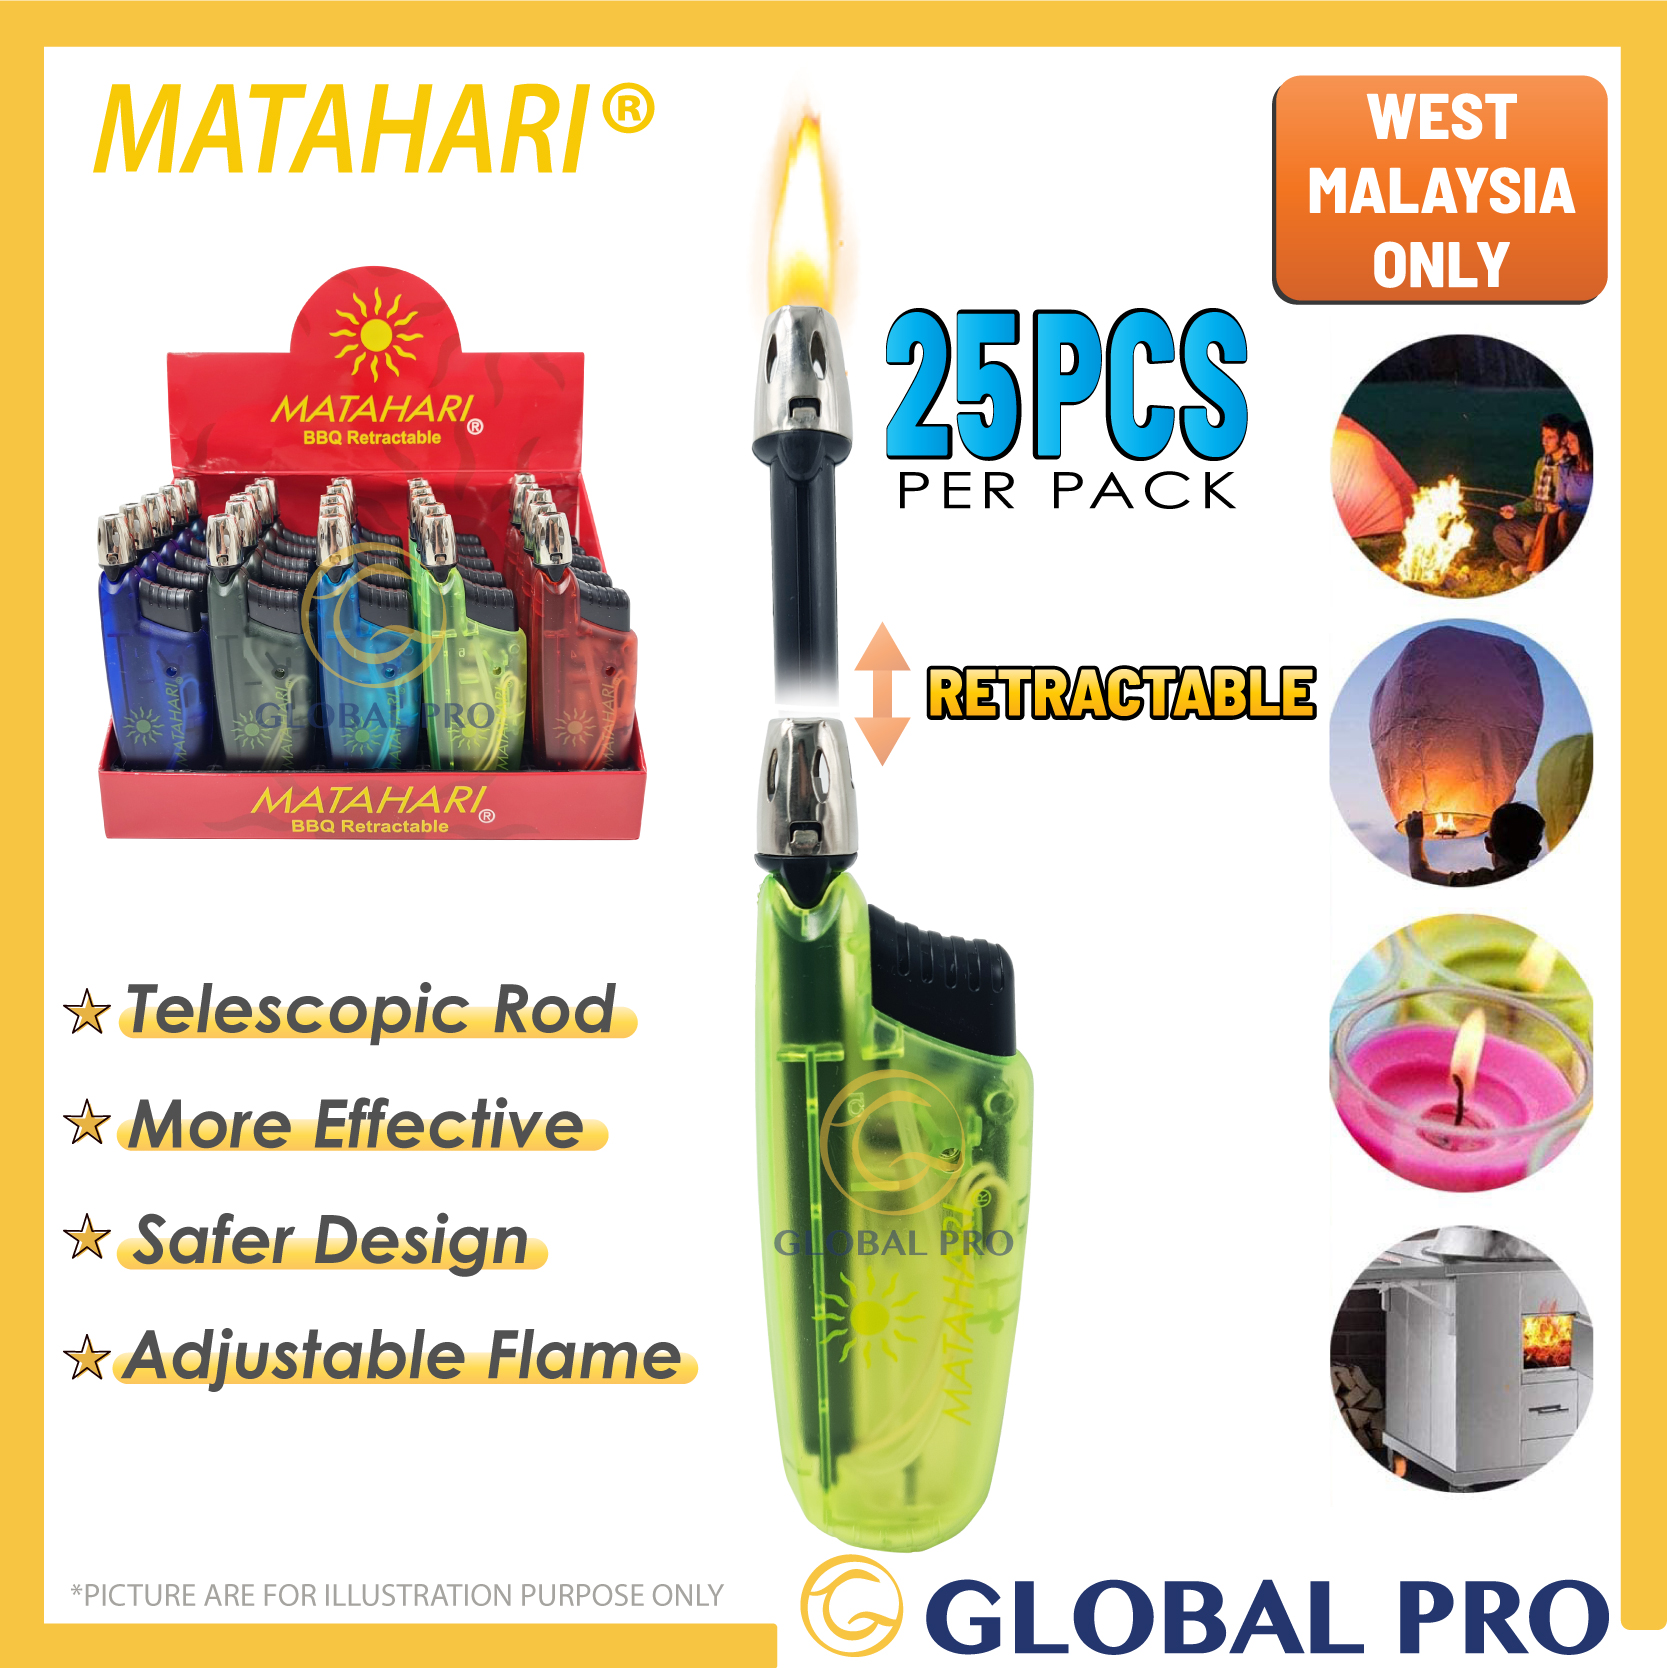 [25PC] Matahari RETRACTABLE GAS LIGHTER Refillable Electronic lighter Candle light for BBQ Camping Cooking P2064-J20